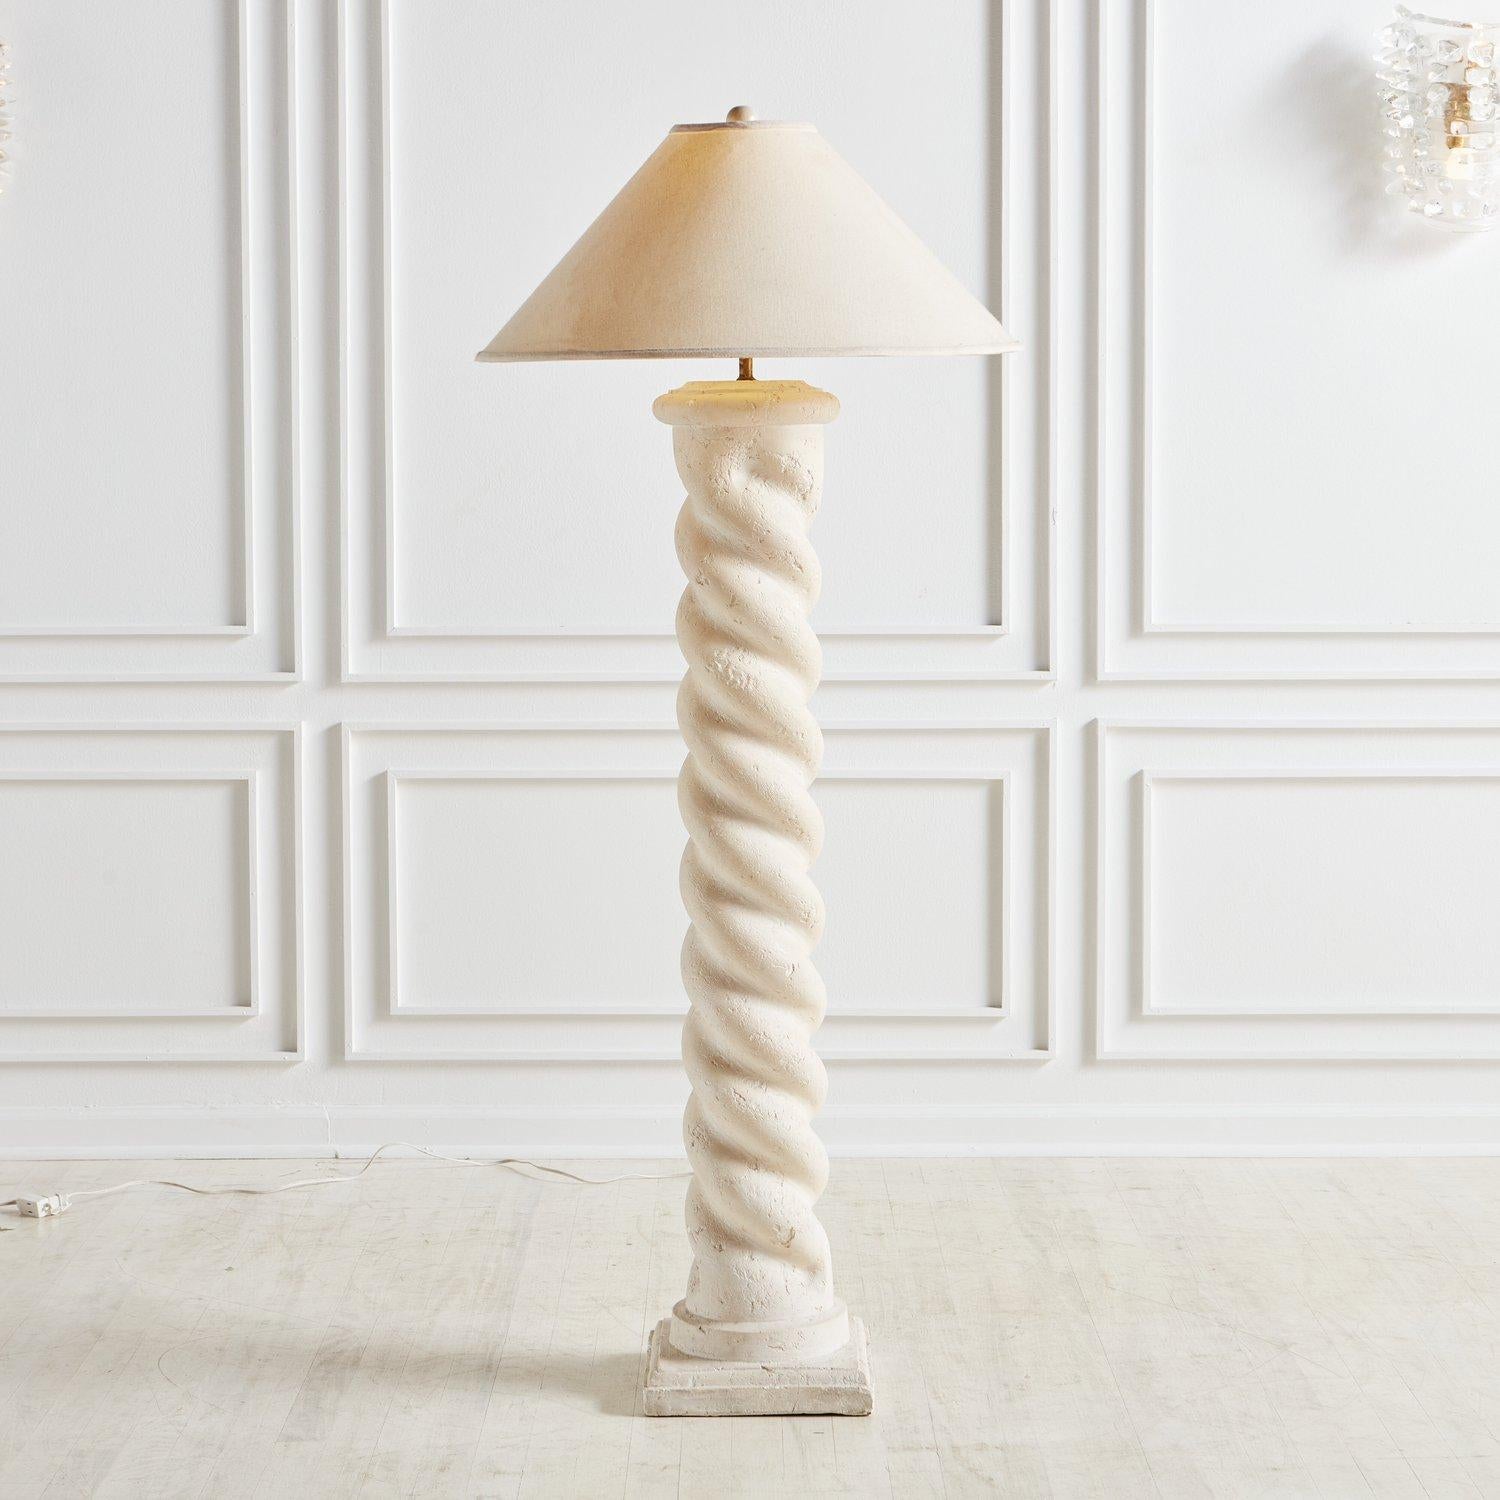 A plaster floor lamp in the style of Michael Taylor featuring a spiral column design with a square base. The textured plaster offers an organic elegance reminiscent of white-washed stone or unfilled travertine. USA, 1980s.